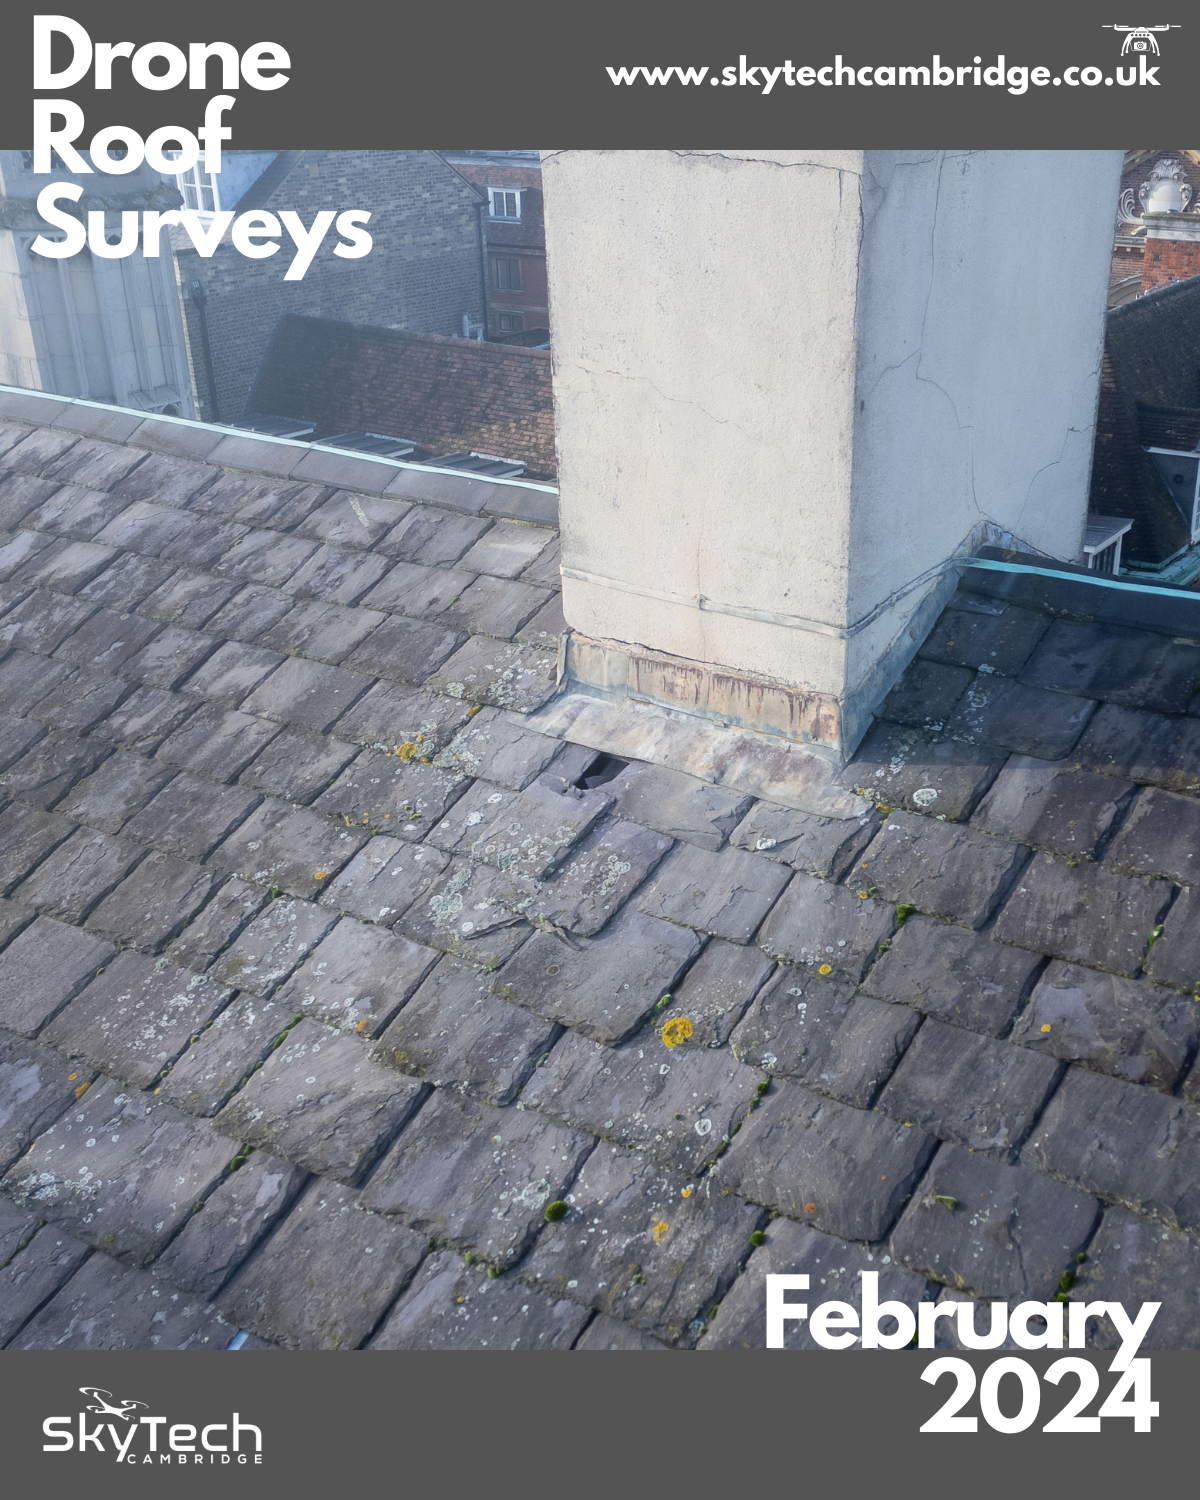 Drone roof survey - damaged roof tile shows exposed fabric membrane